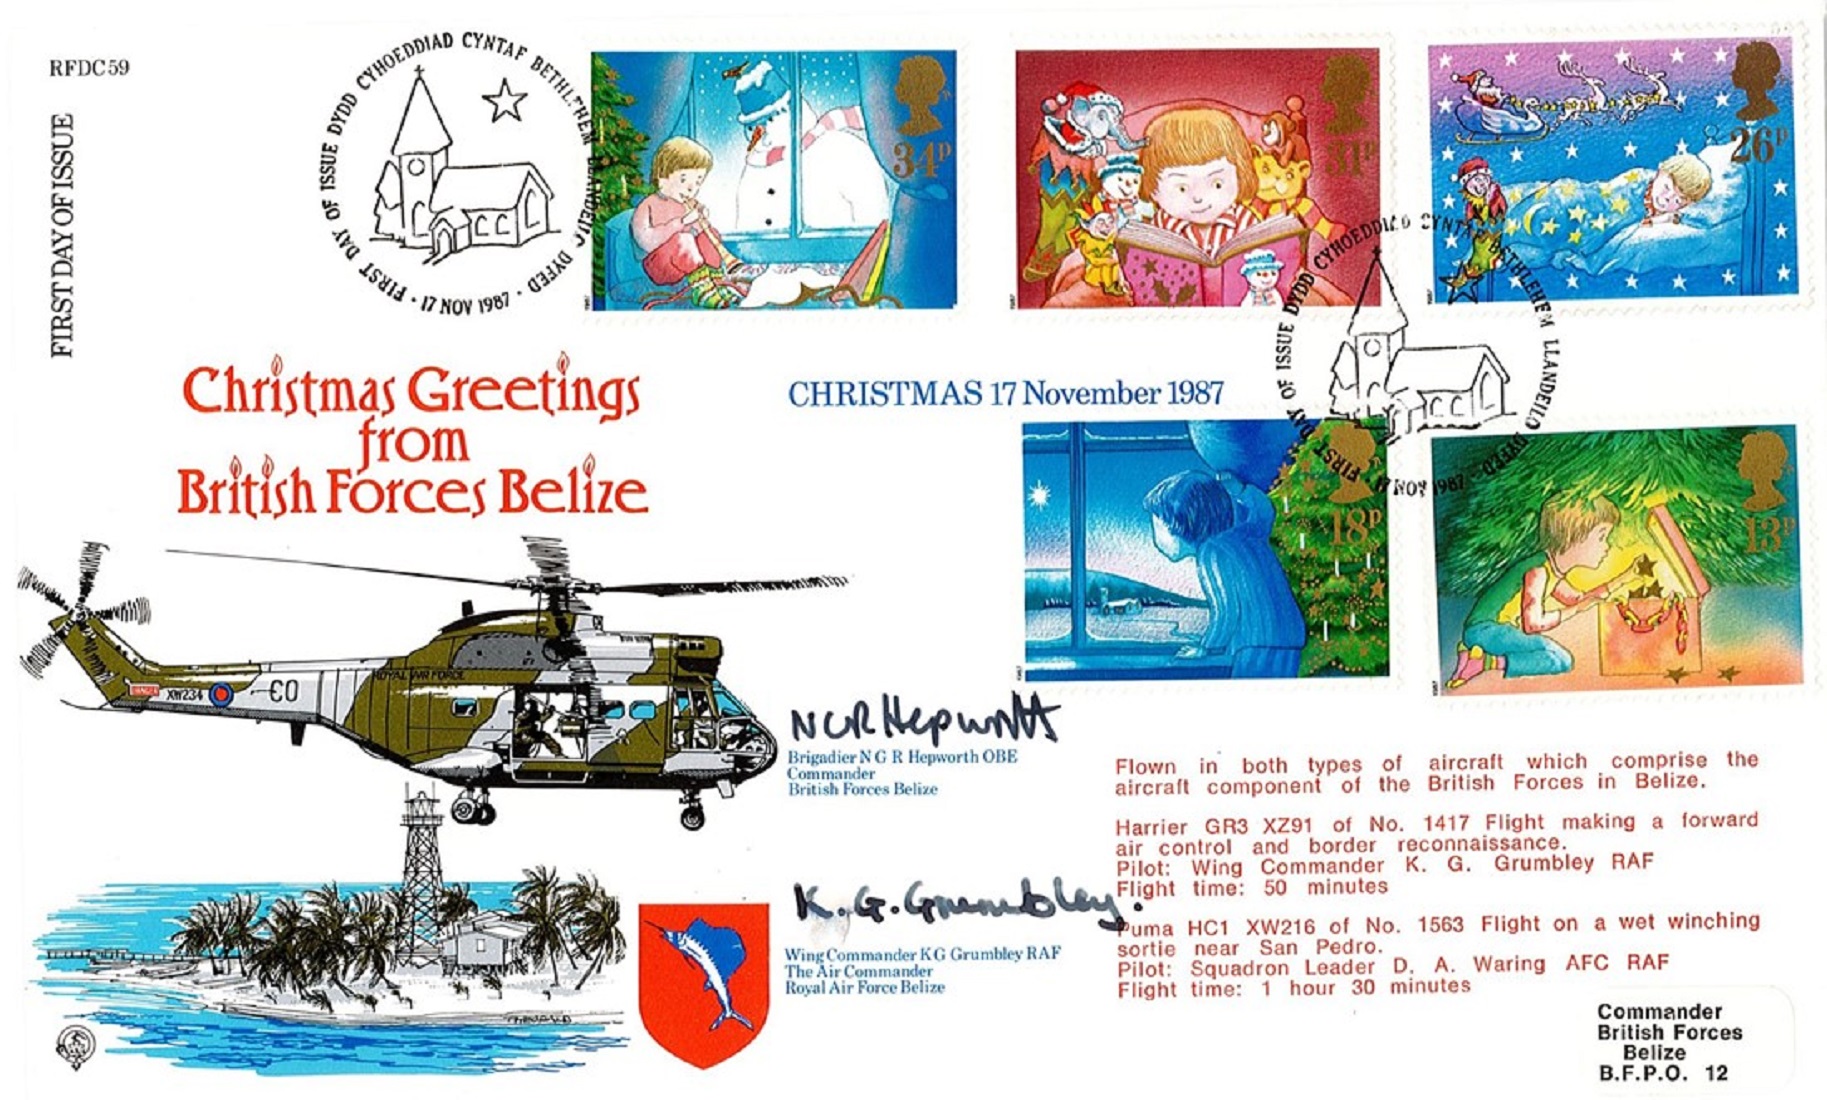 Brigadier NGR Hepworth and Wg Cdr KG Grumbley Signed Christmas Greetings From British Forces